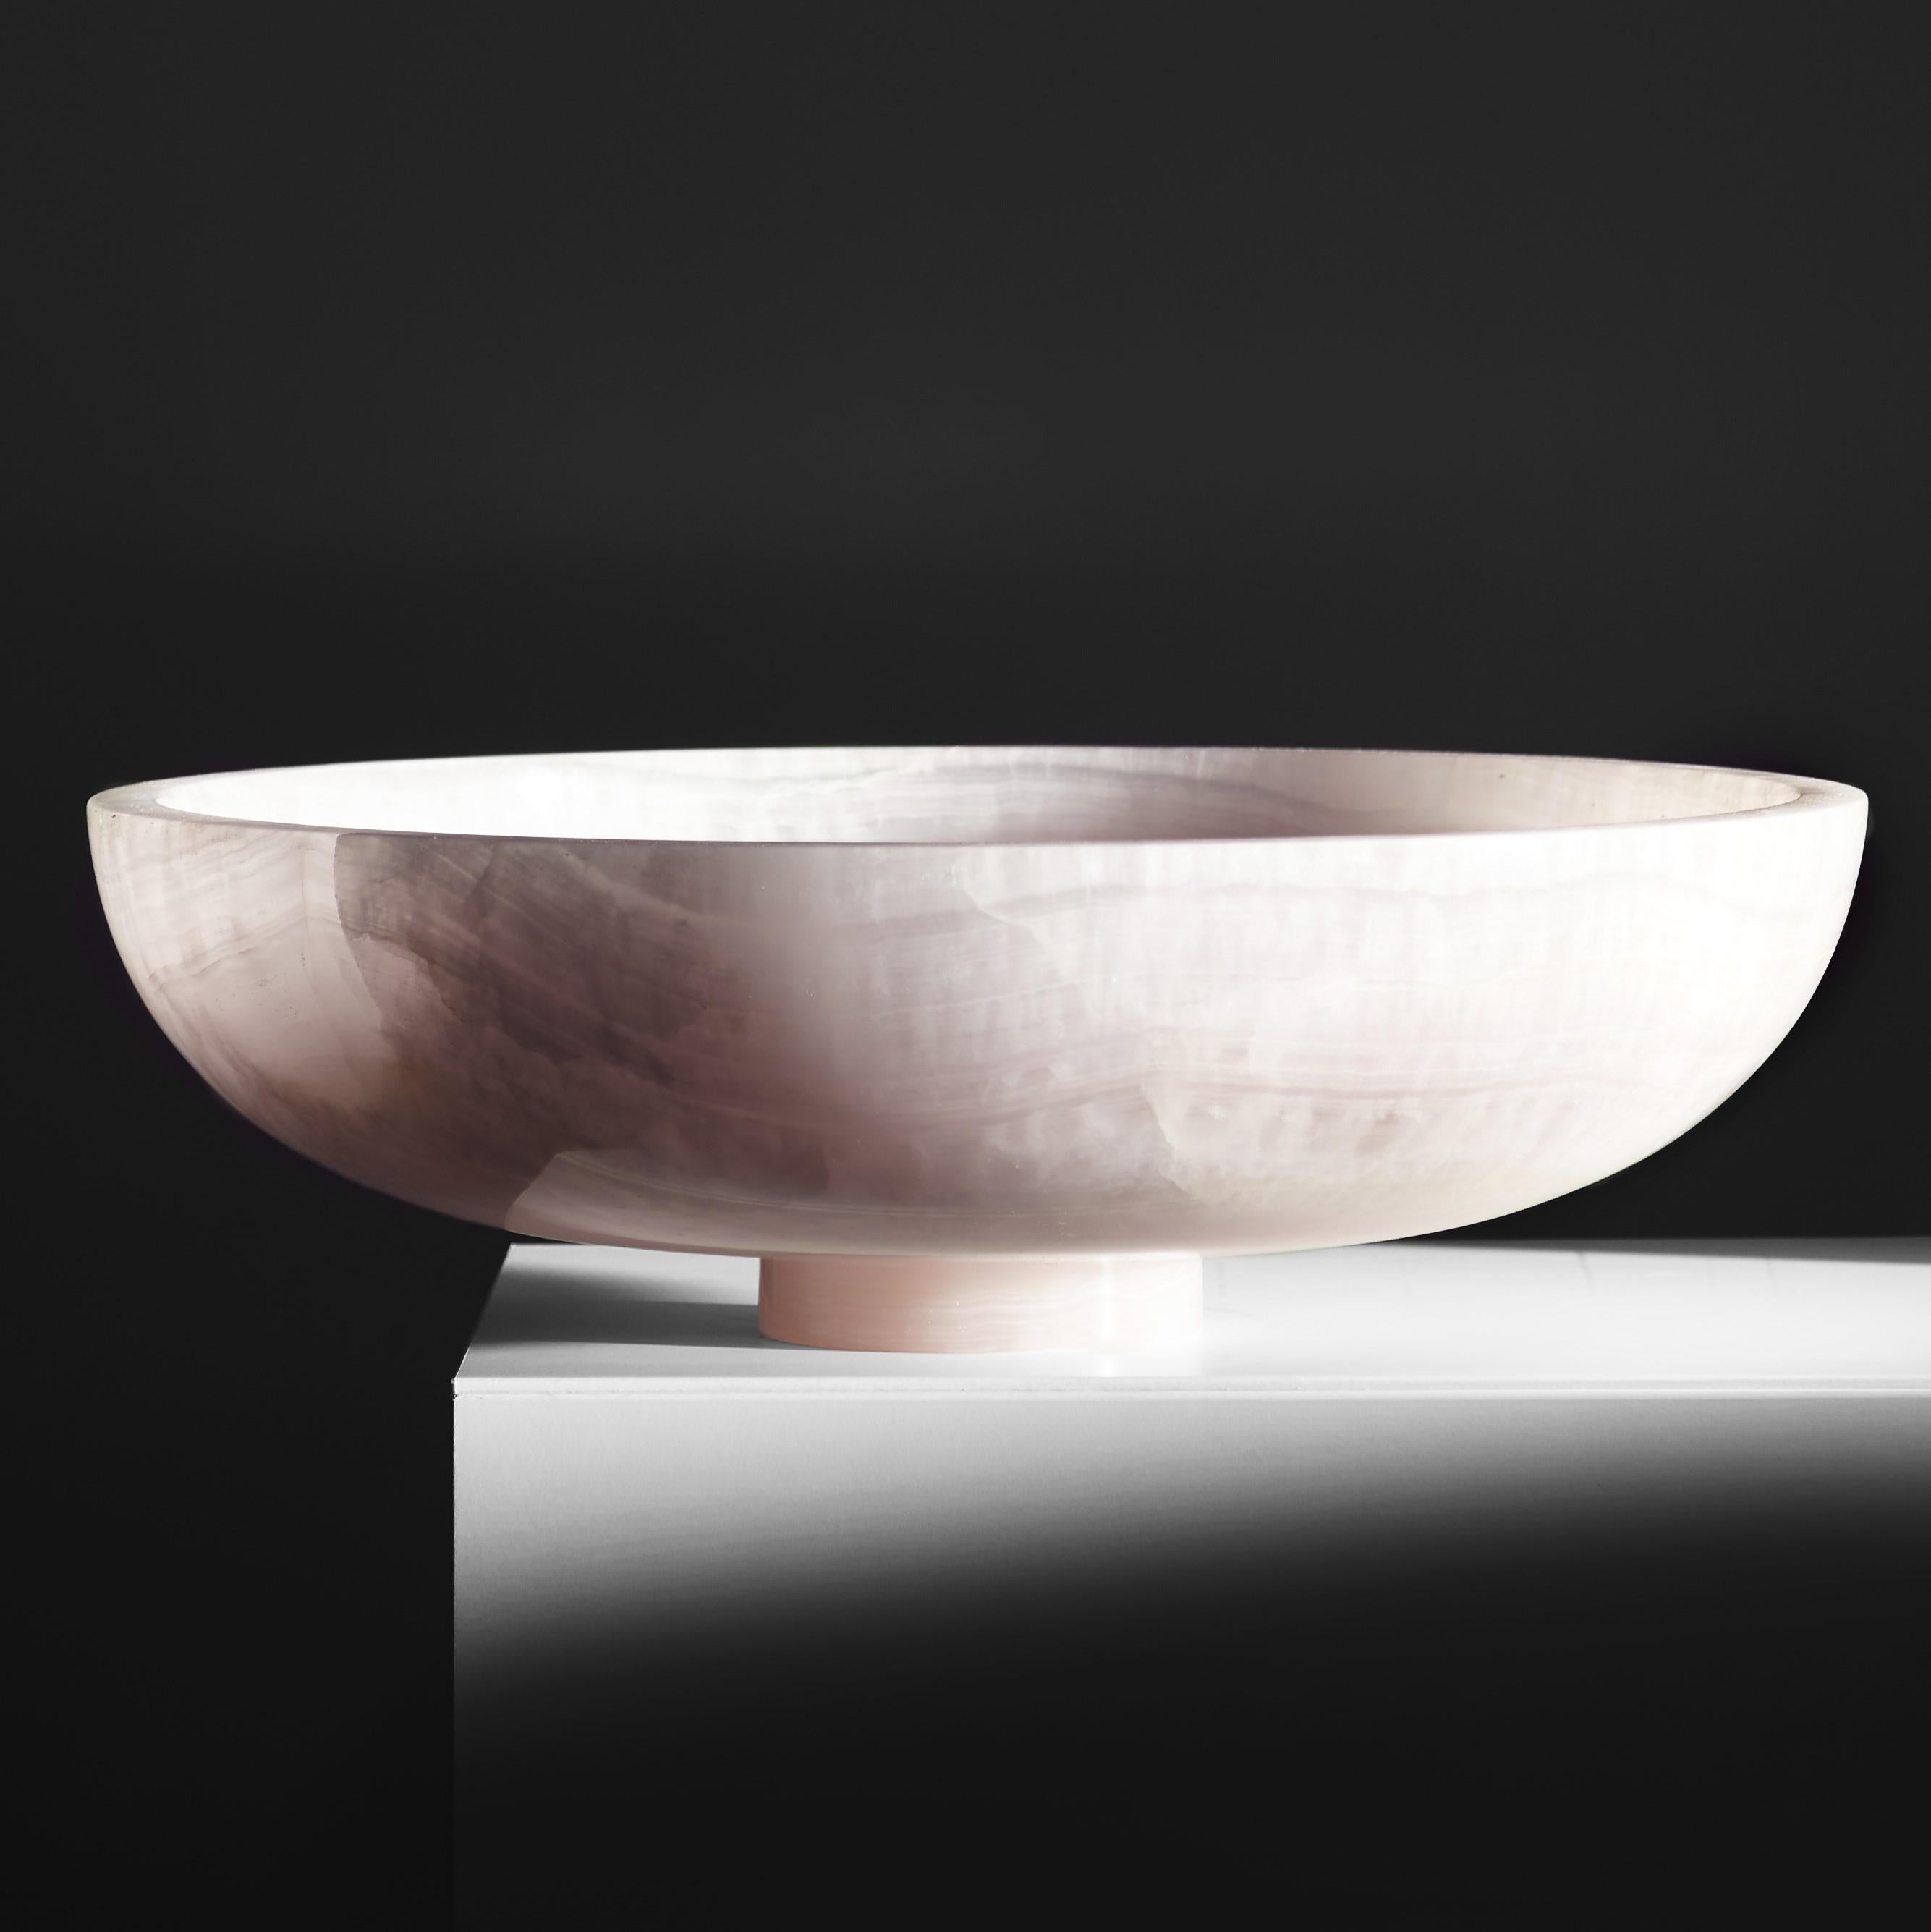 Set 2 Onyx Twosidestory bowl XL by Lisette Rützou
Dimensions: D 40 cm
Materials: Levanto Bordeaux marble

 Lisette Rützou’s design is motivated by an urge to articulate a story. Inspired by the beauty of materials, form and architecture, each